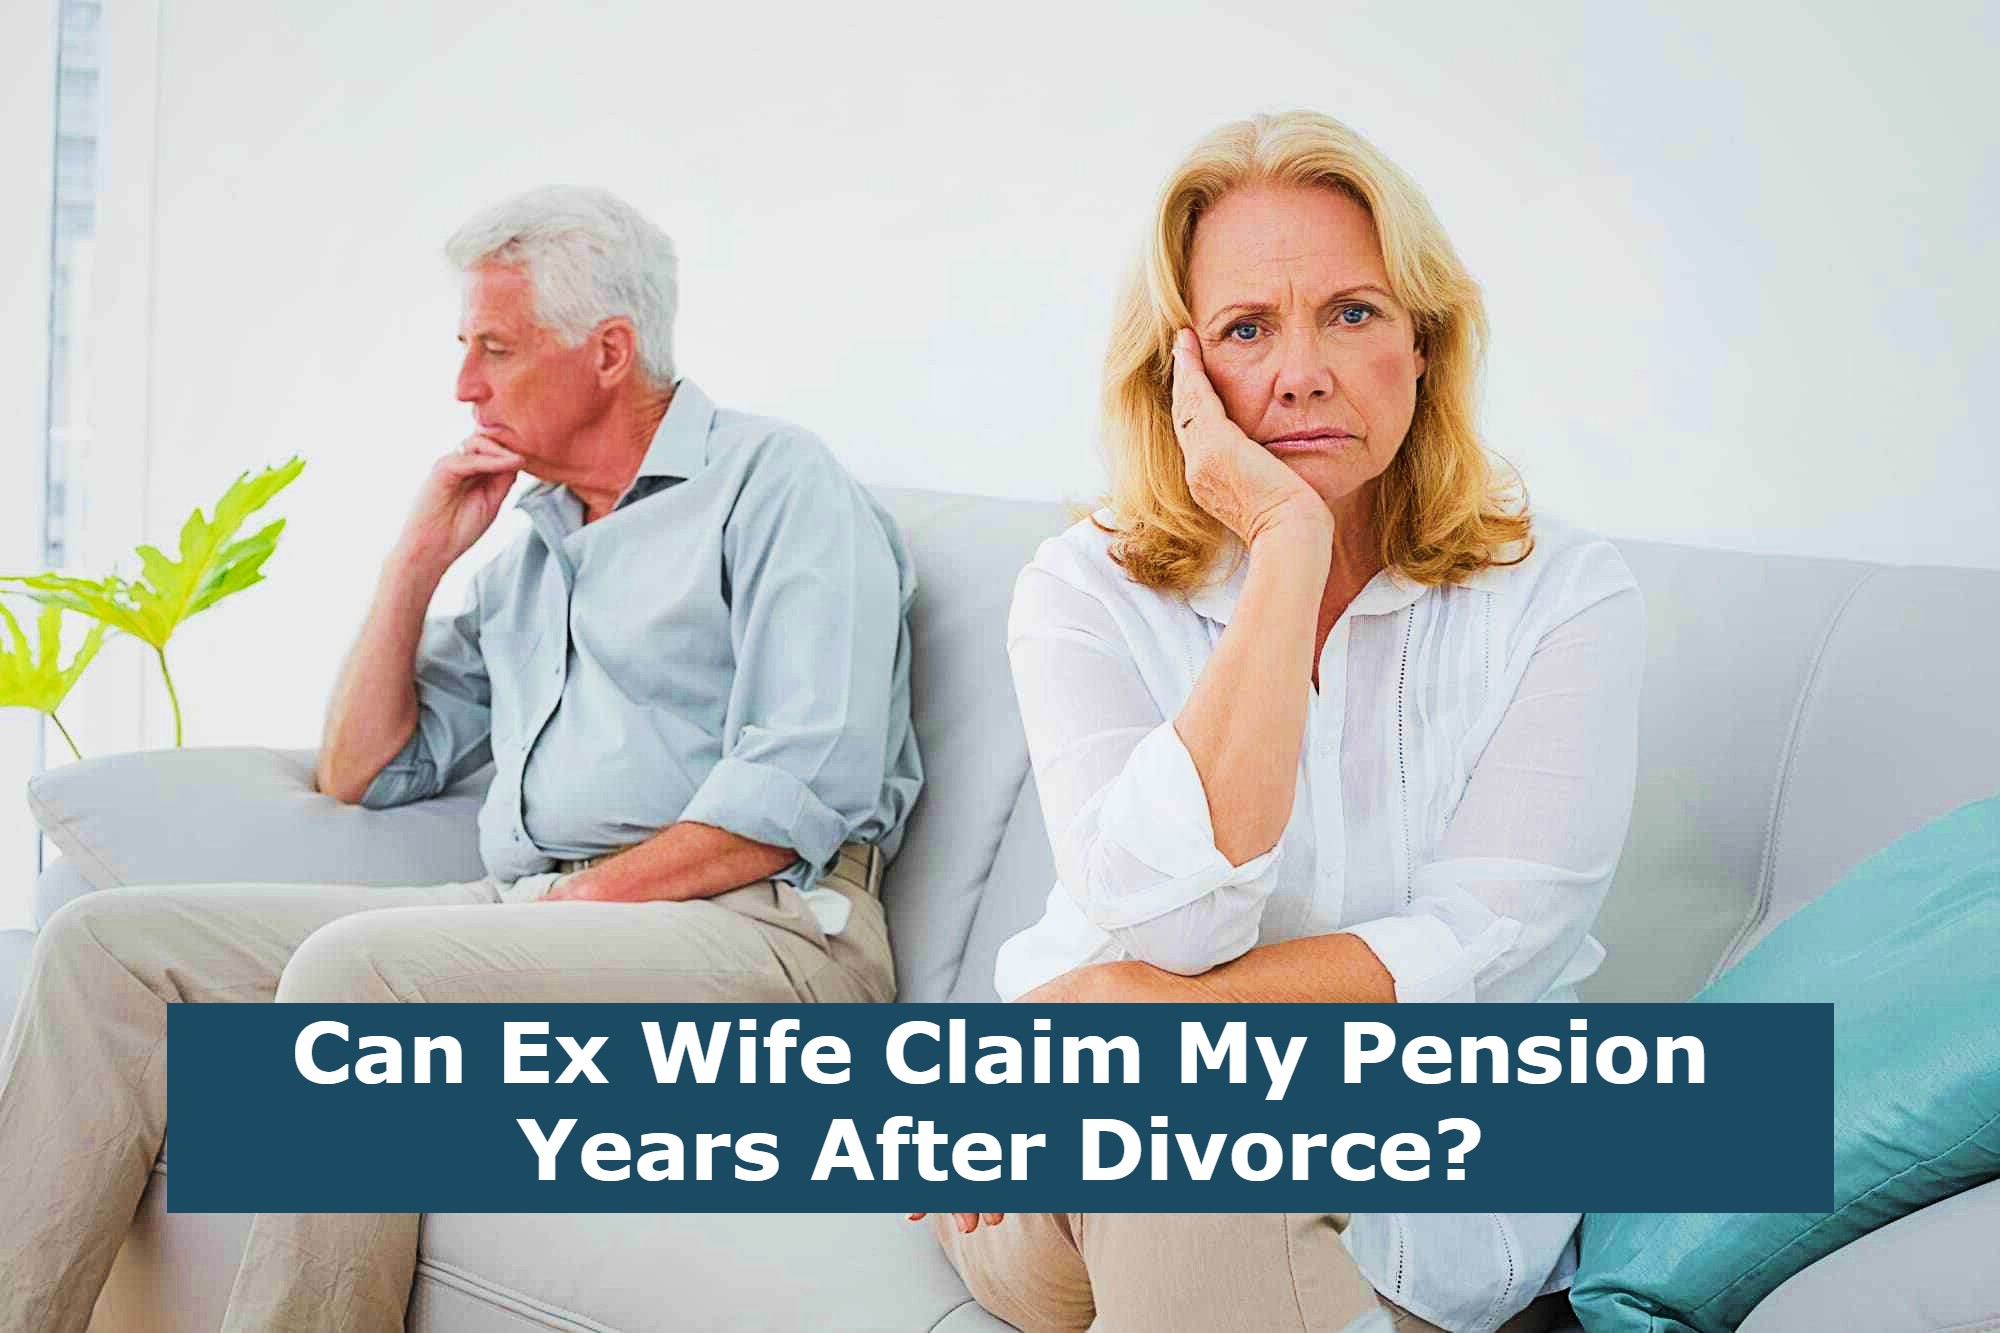 Can Ex Wife Claim My Pension Years After Divorce?